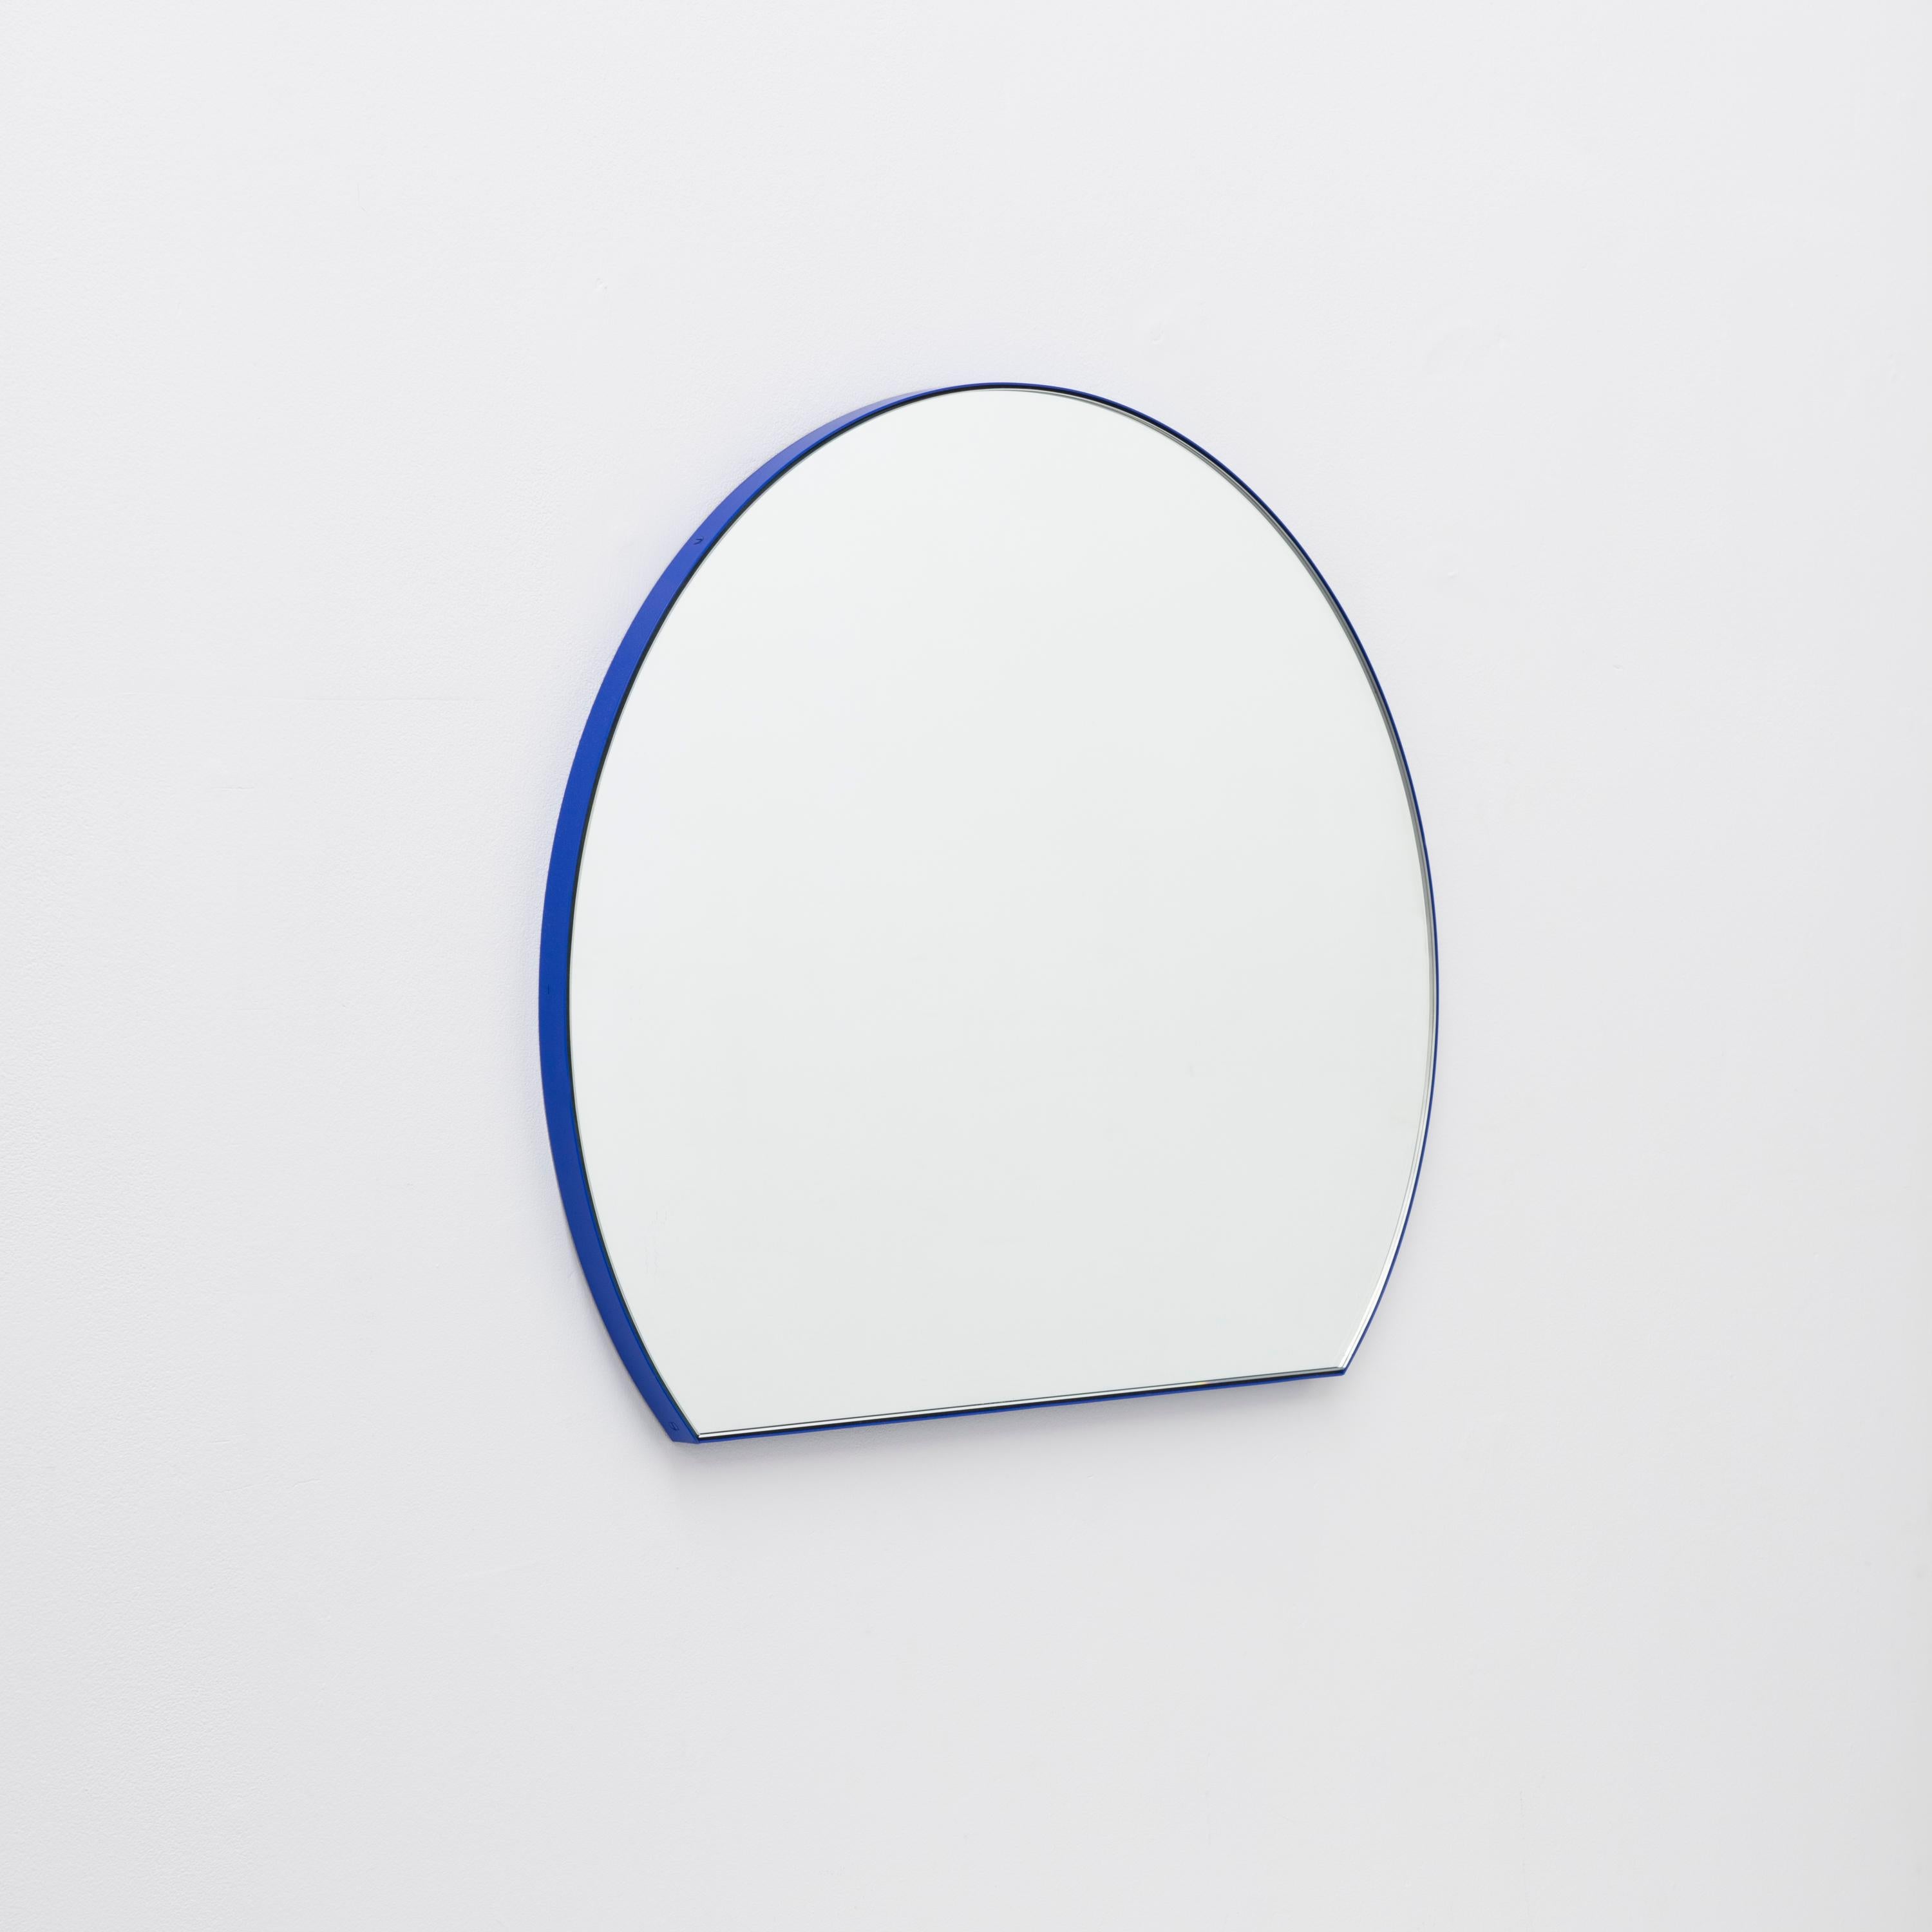 Powder-Coated Orbis Trecus Cropped Circular Modern Mirror with Blue Frame, Small For Sale